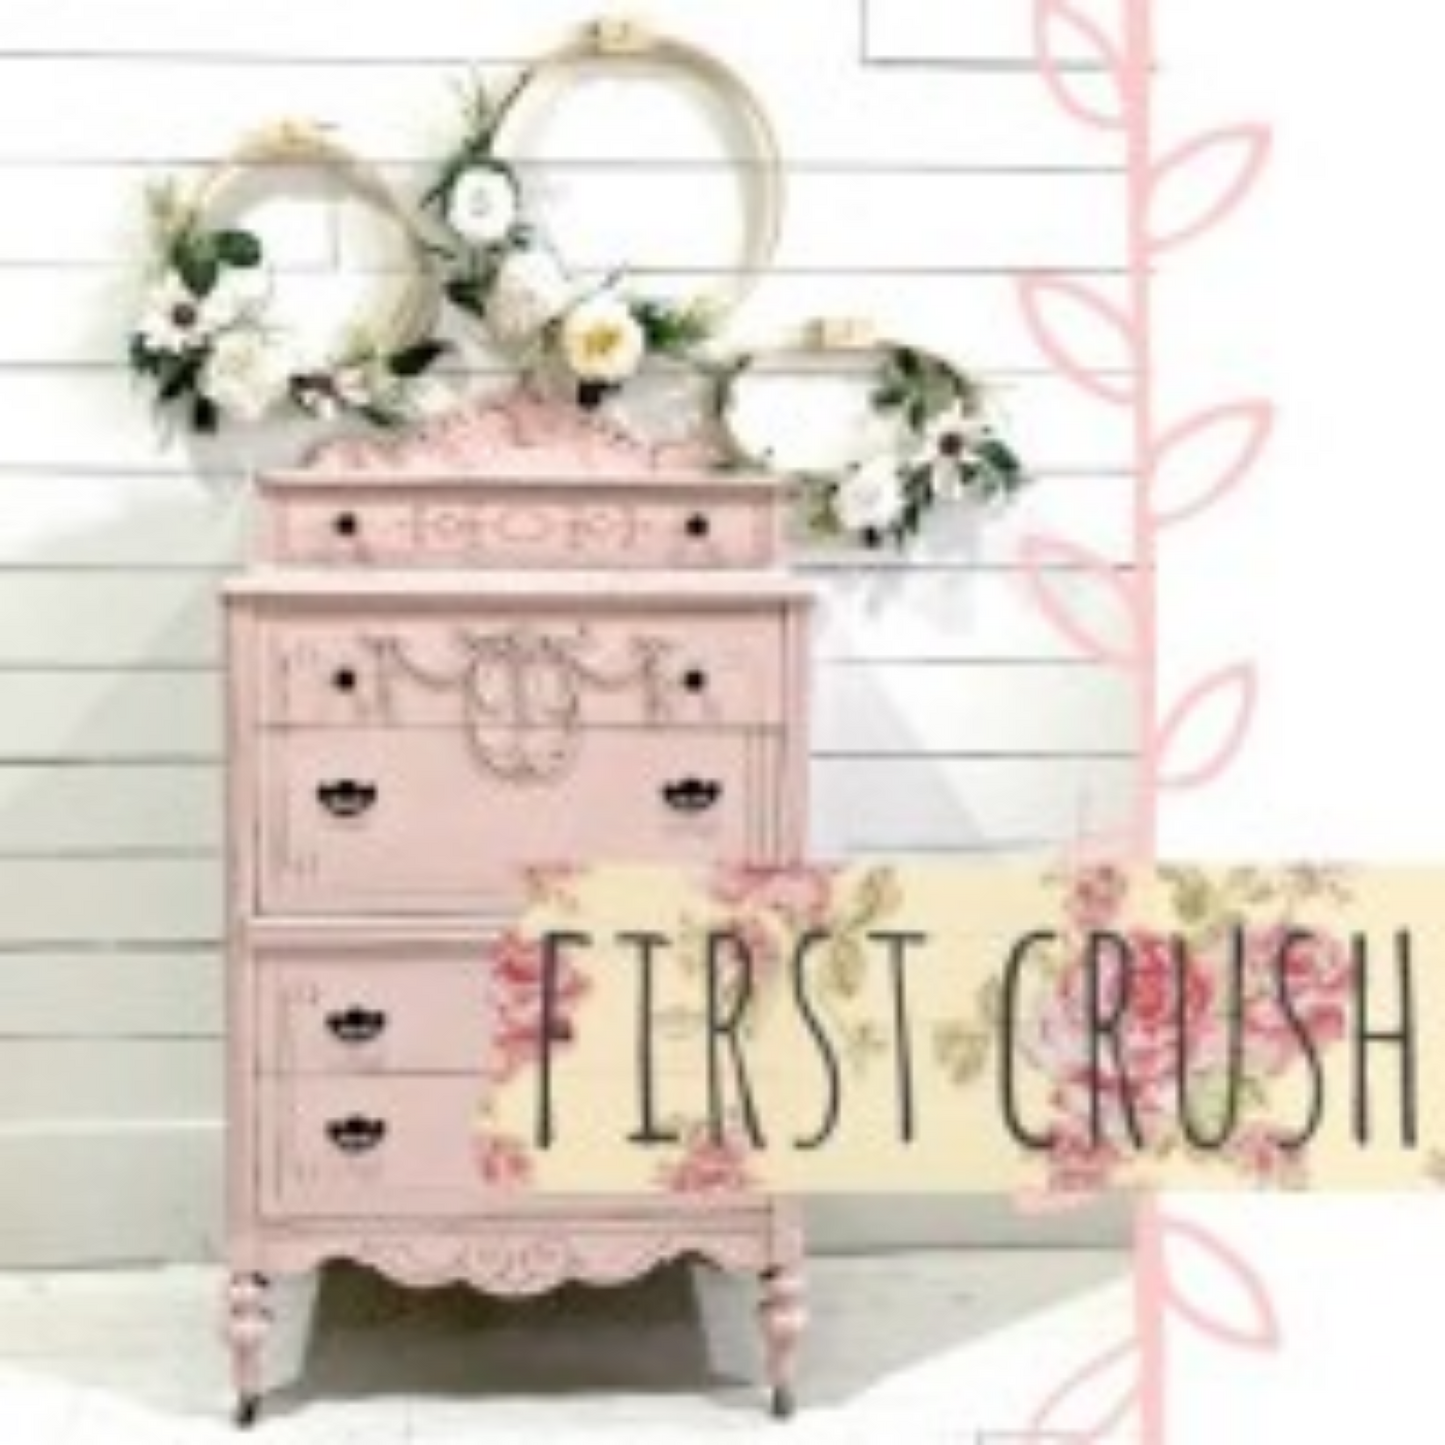 Antique dresser painted in First Crush (pale pink) by Sweet Pickins Milk Paint available at Milton's Daughter